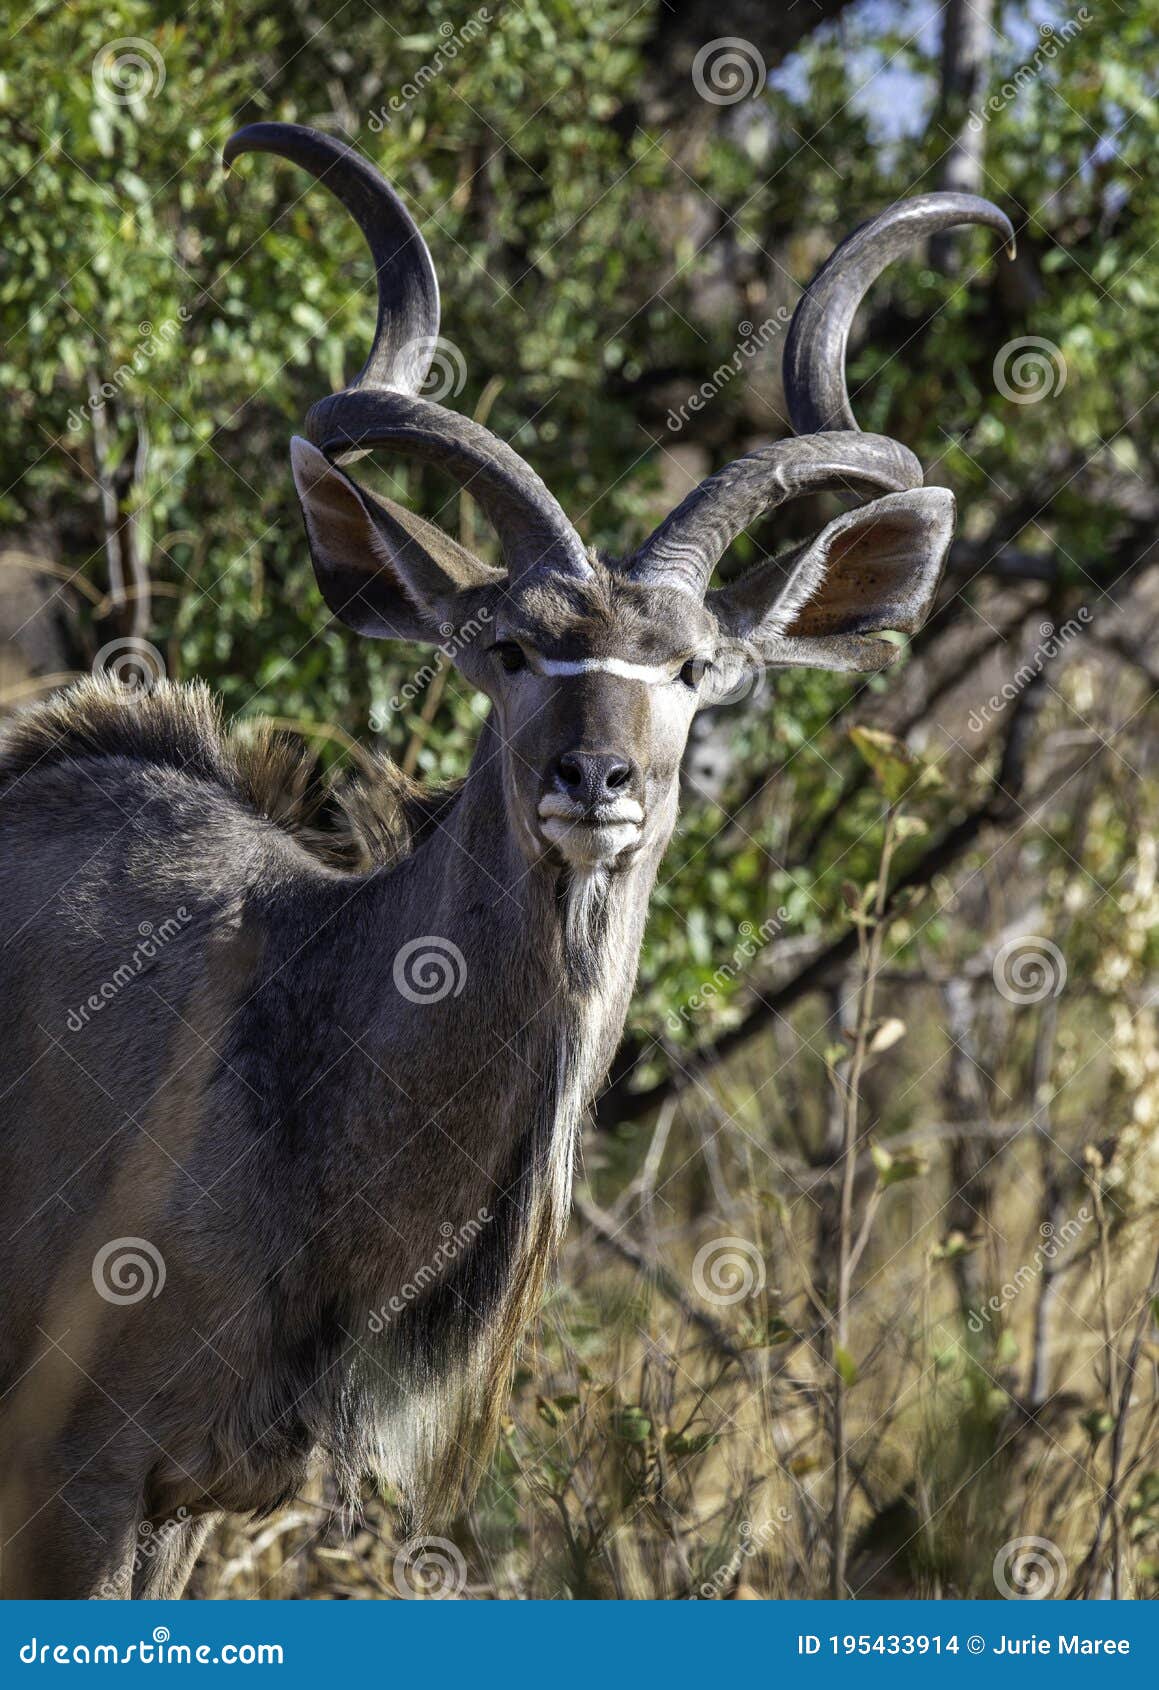 kudu antelope, photographed in the wild.